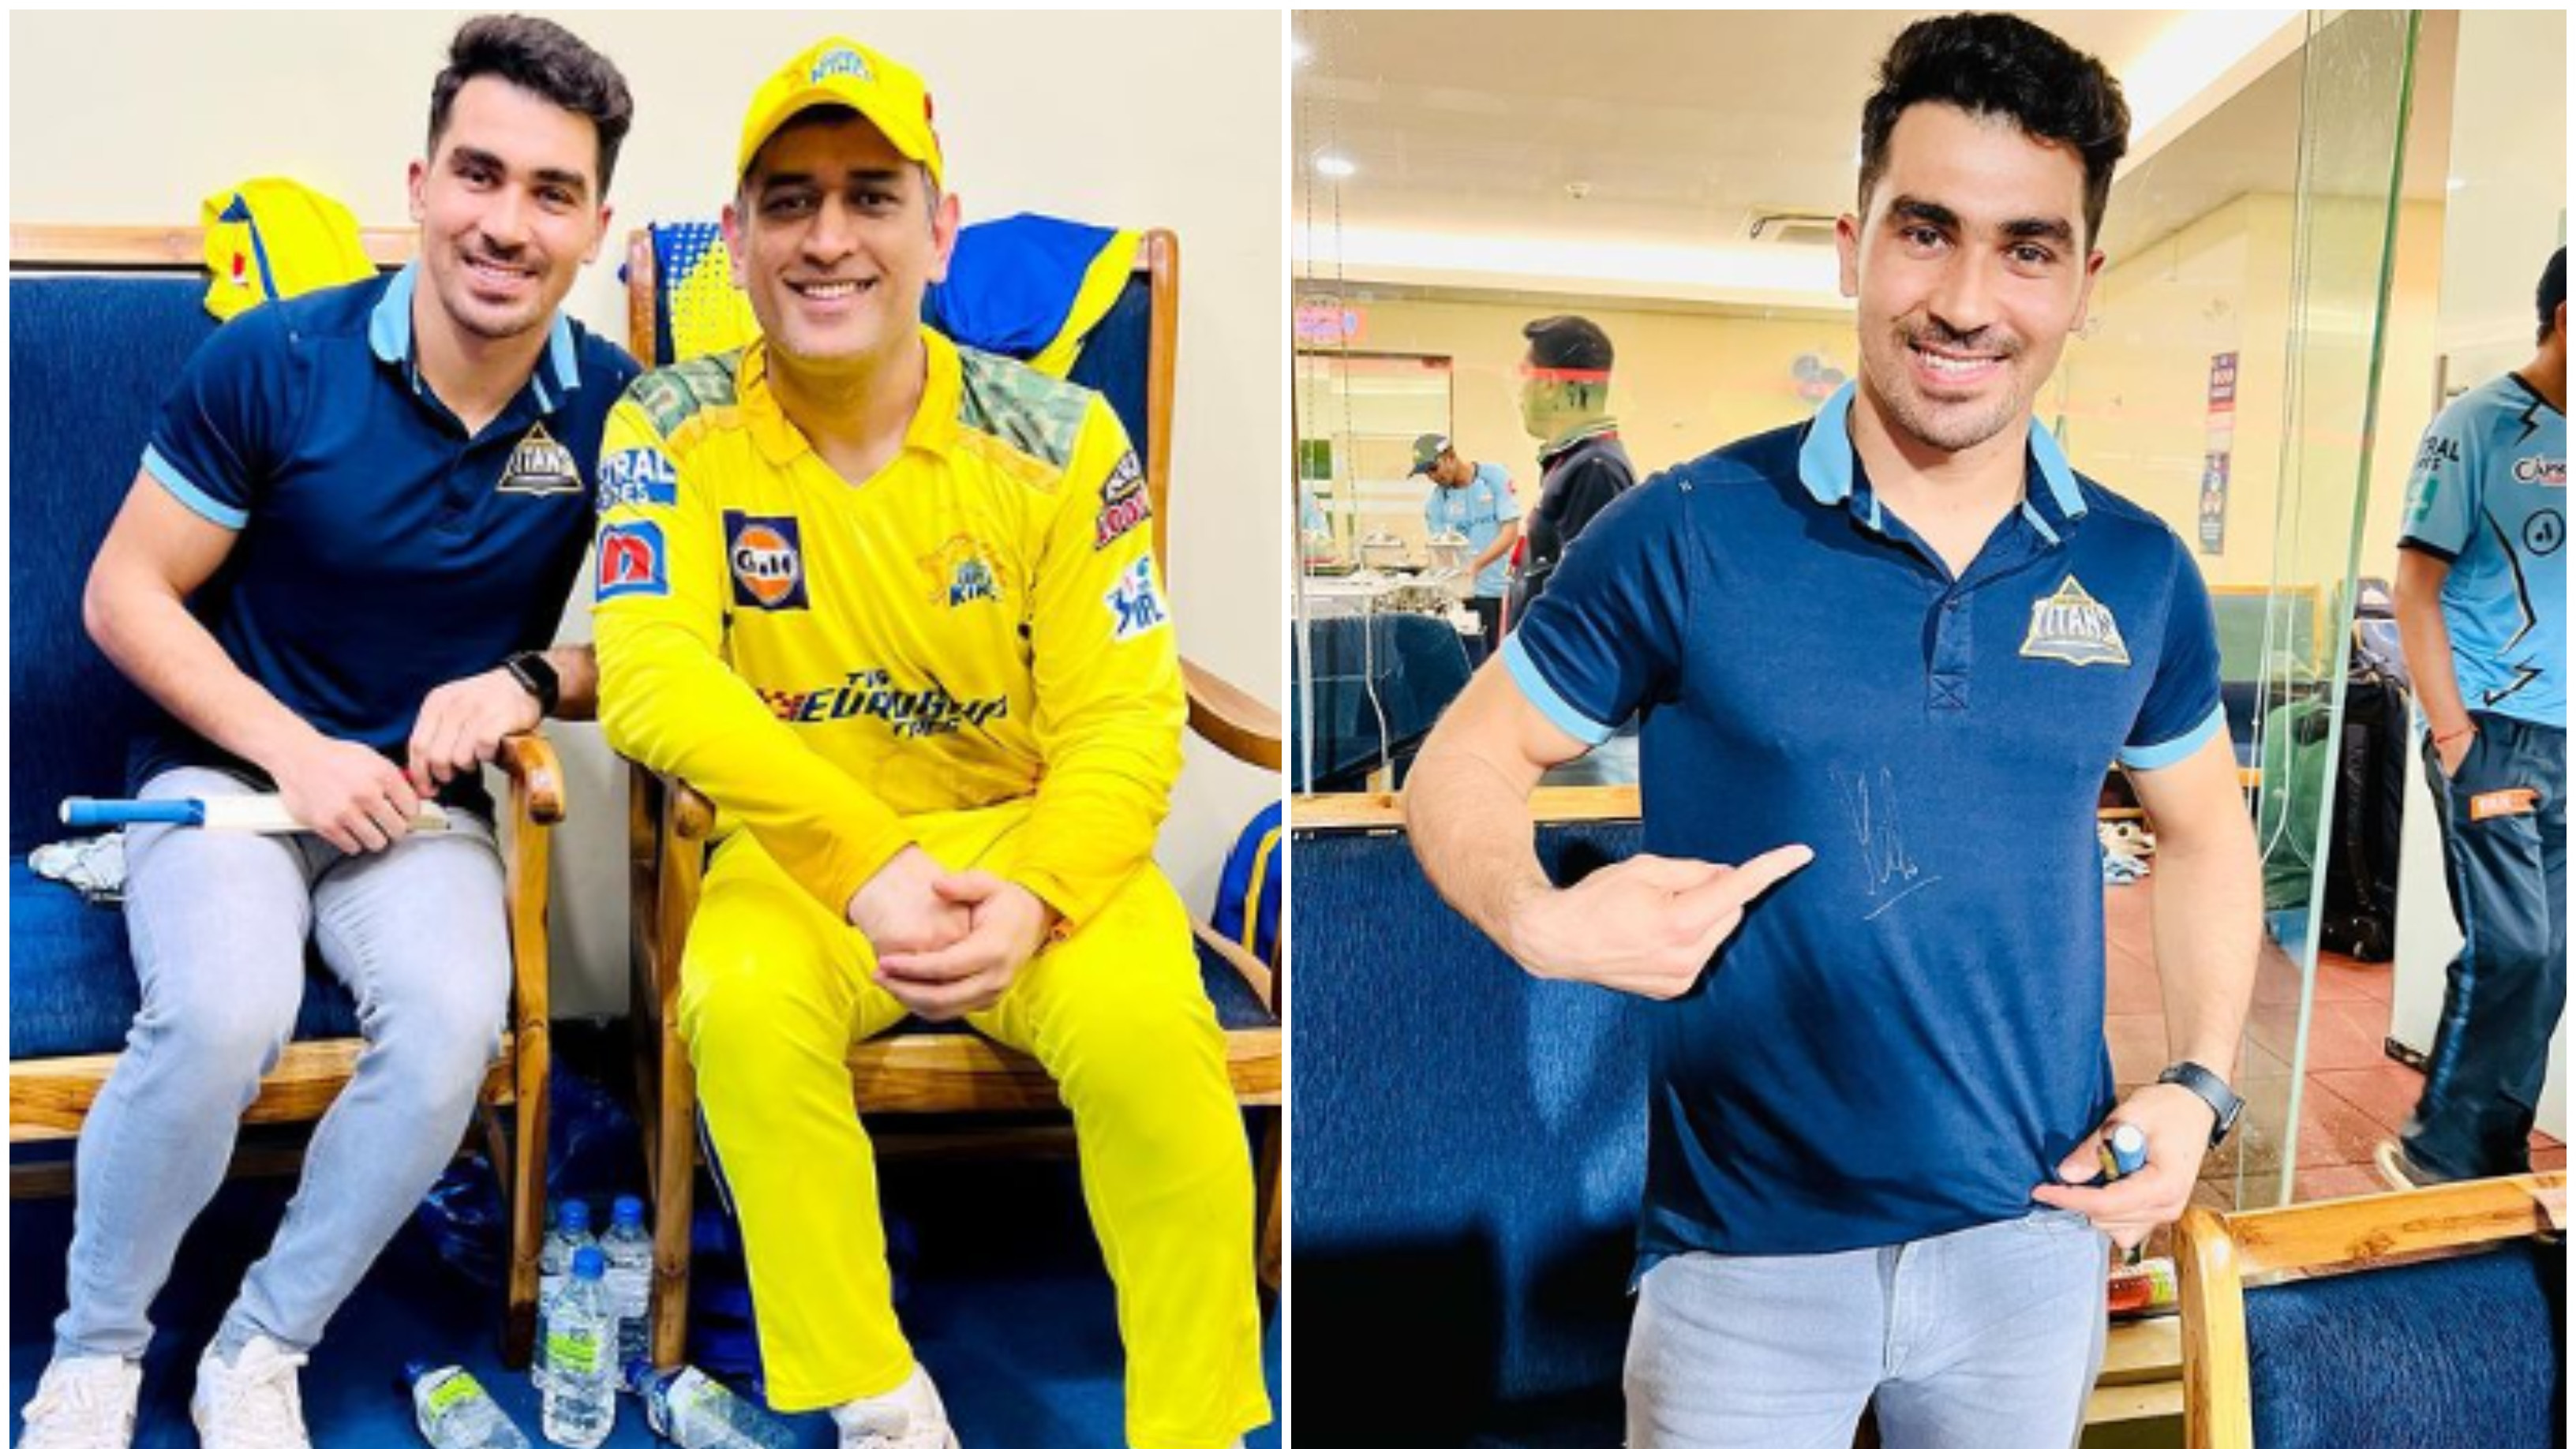 IPL 2022: “It was a pleasure meeting a legend”, Rahmanullah Gurbaz cherishes his interaction with MS Dhoni